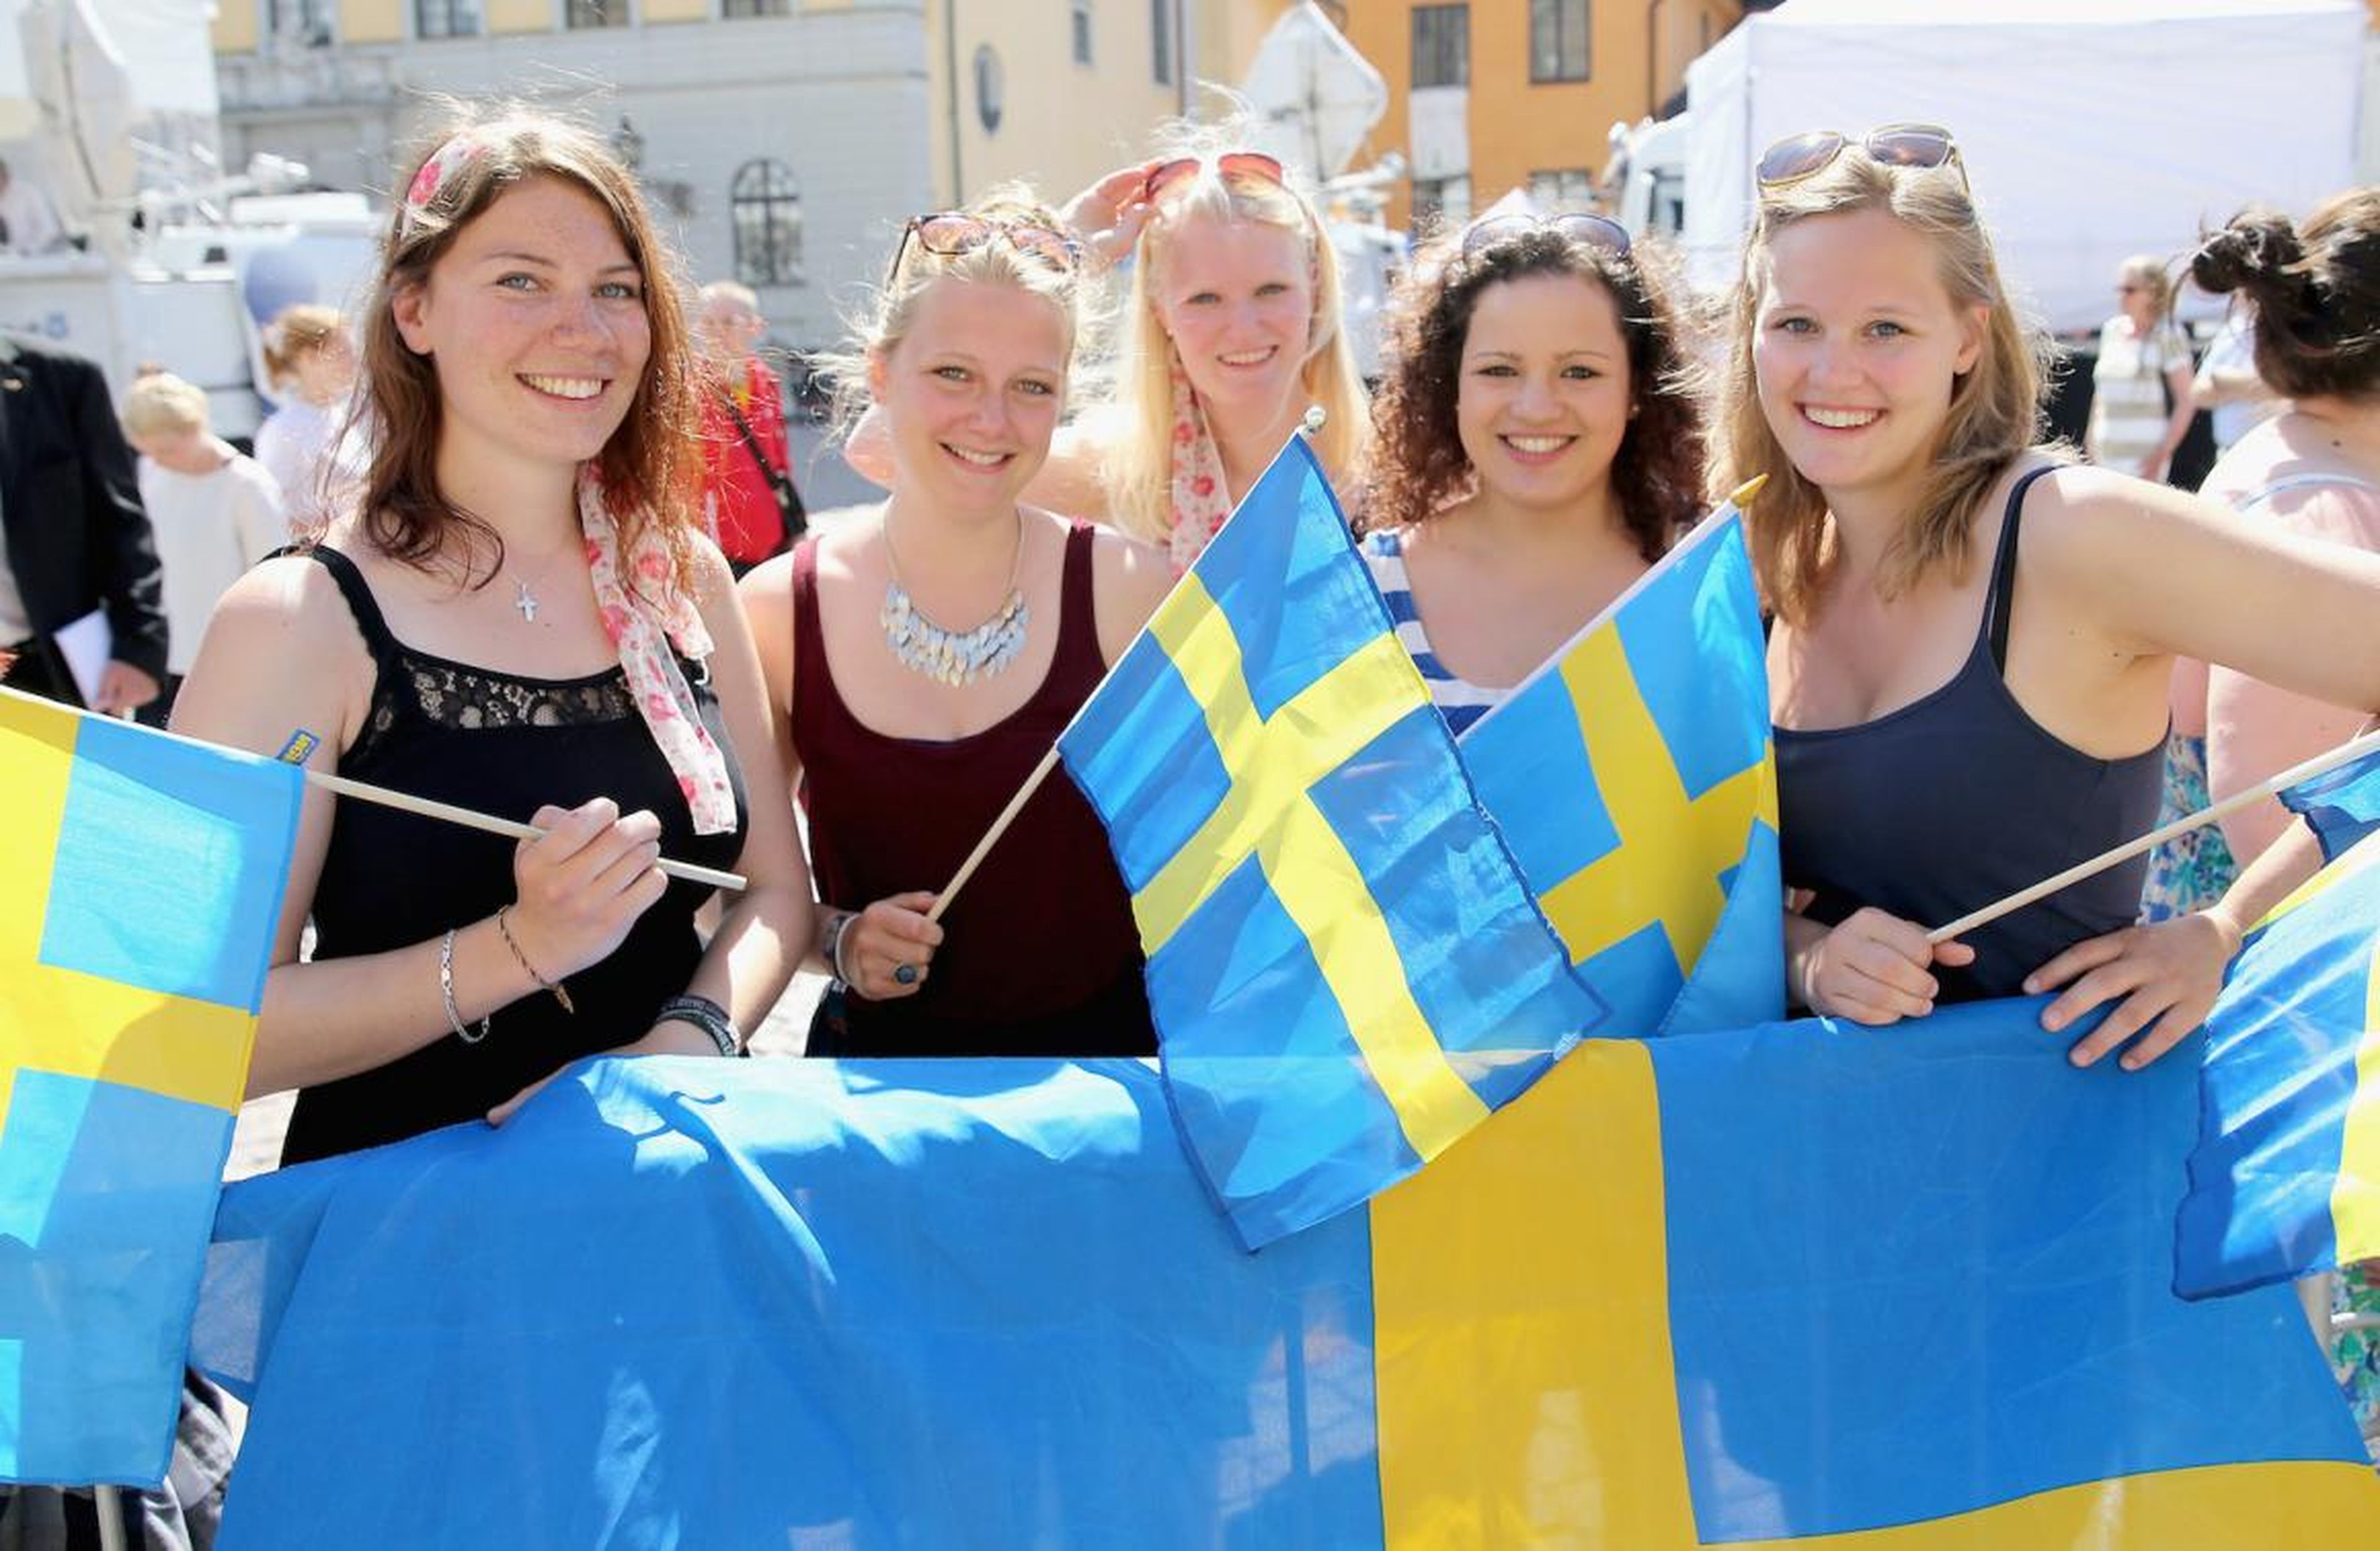 1. Sweden. Scores of 10.0 on progress, 9.9 on income equality, 9.8 on human rights, and 9.6 on safety and gender equality make Sweden the best country to live in if you're a woman in 2019.